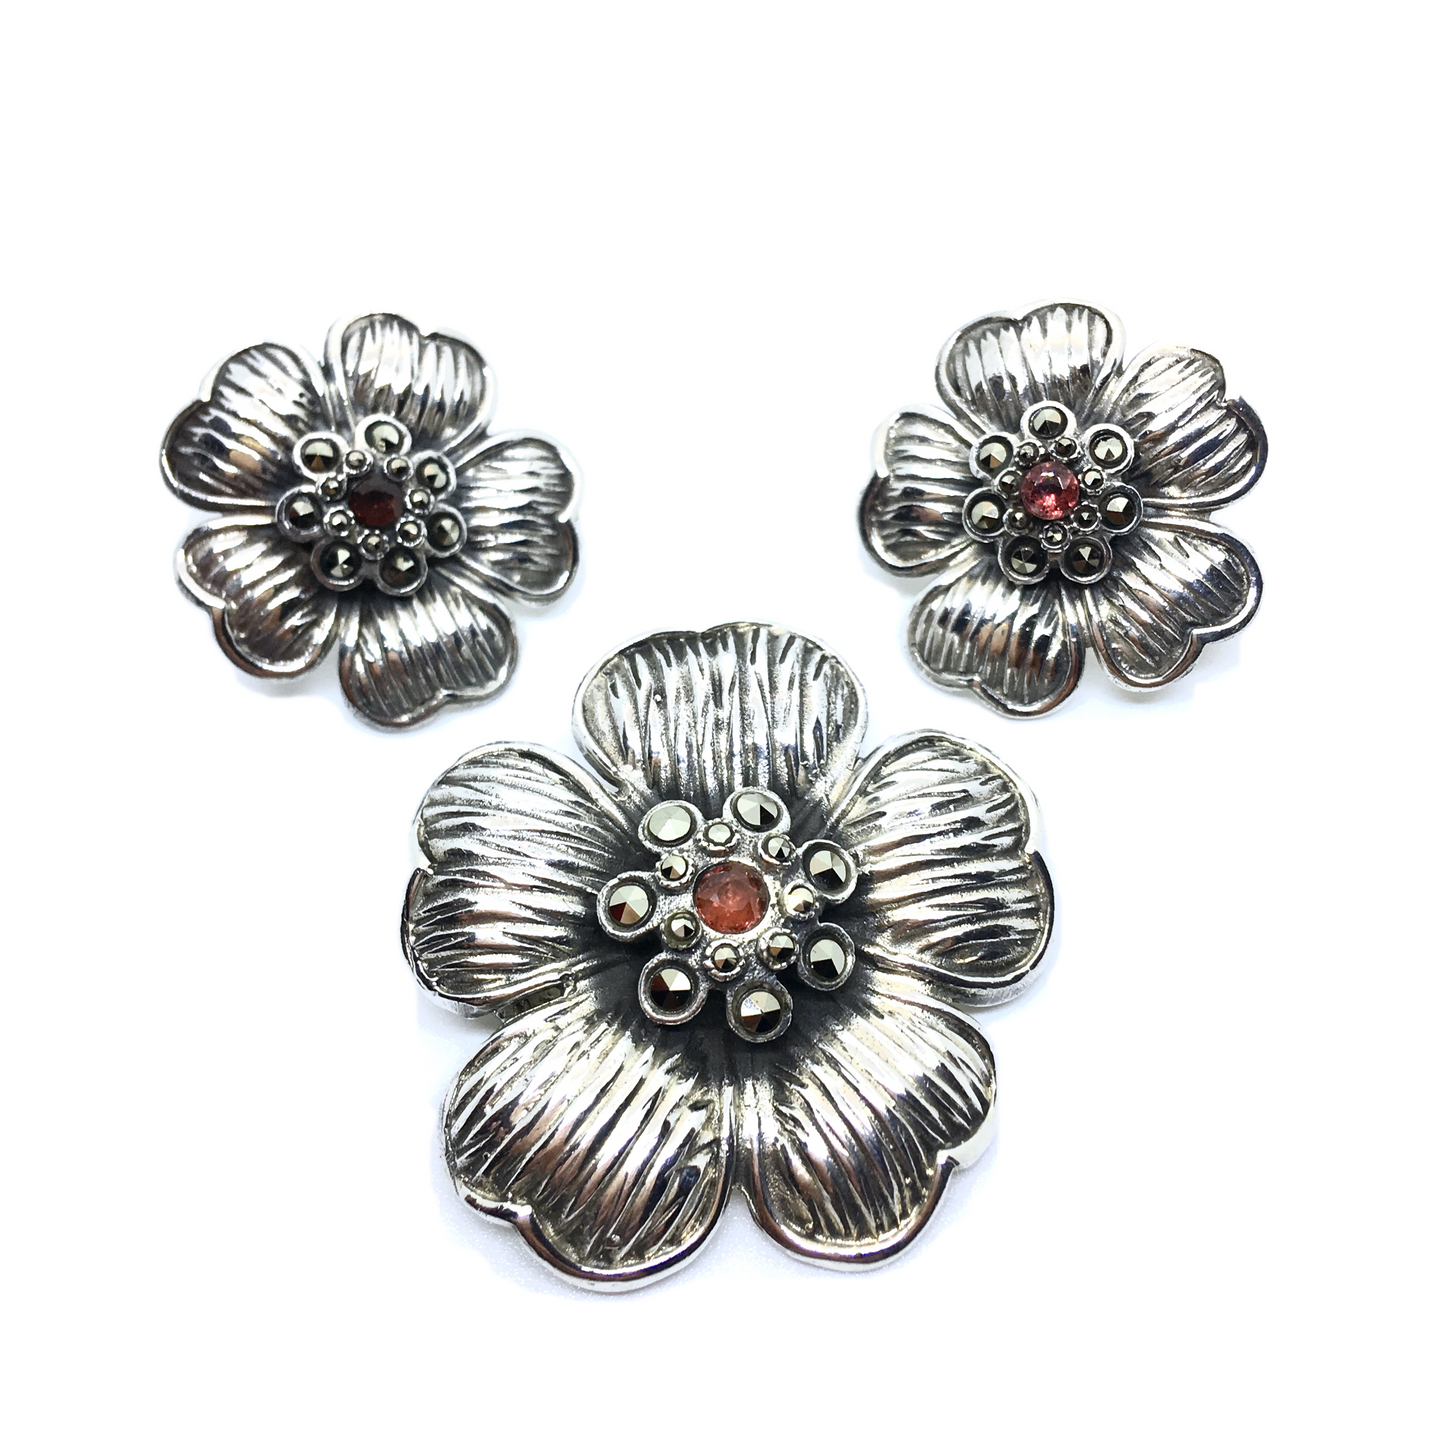 Brooches & Lapel Pins - Sterling Silver Garnet Dogwood Matching Jewelry set - Pre-owned Flower Brooch & Earrings - Marcasite Stone Pin